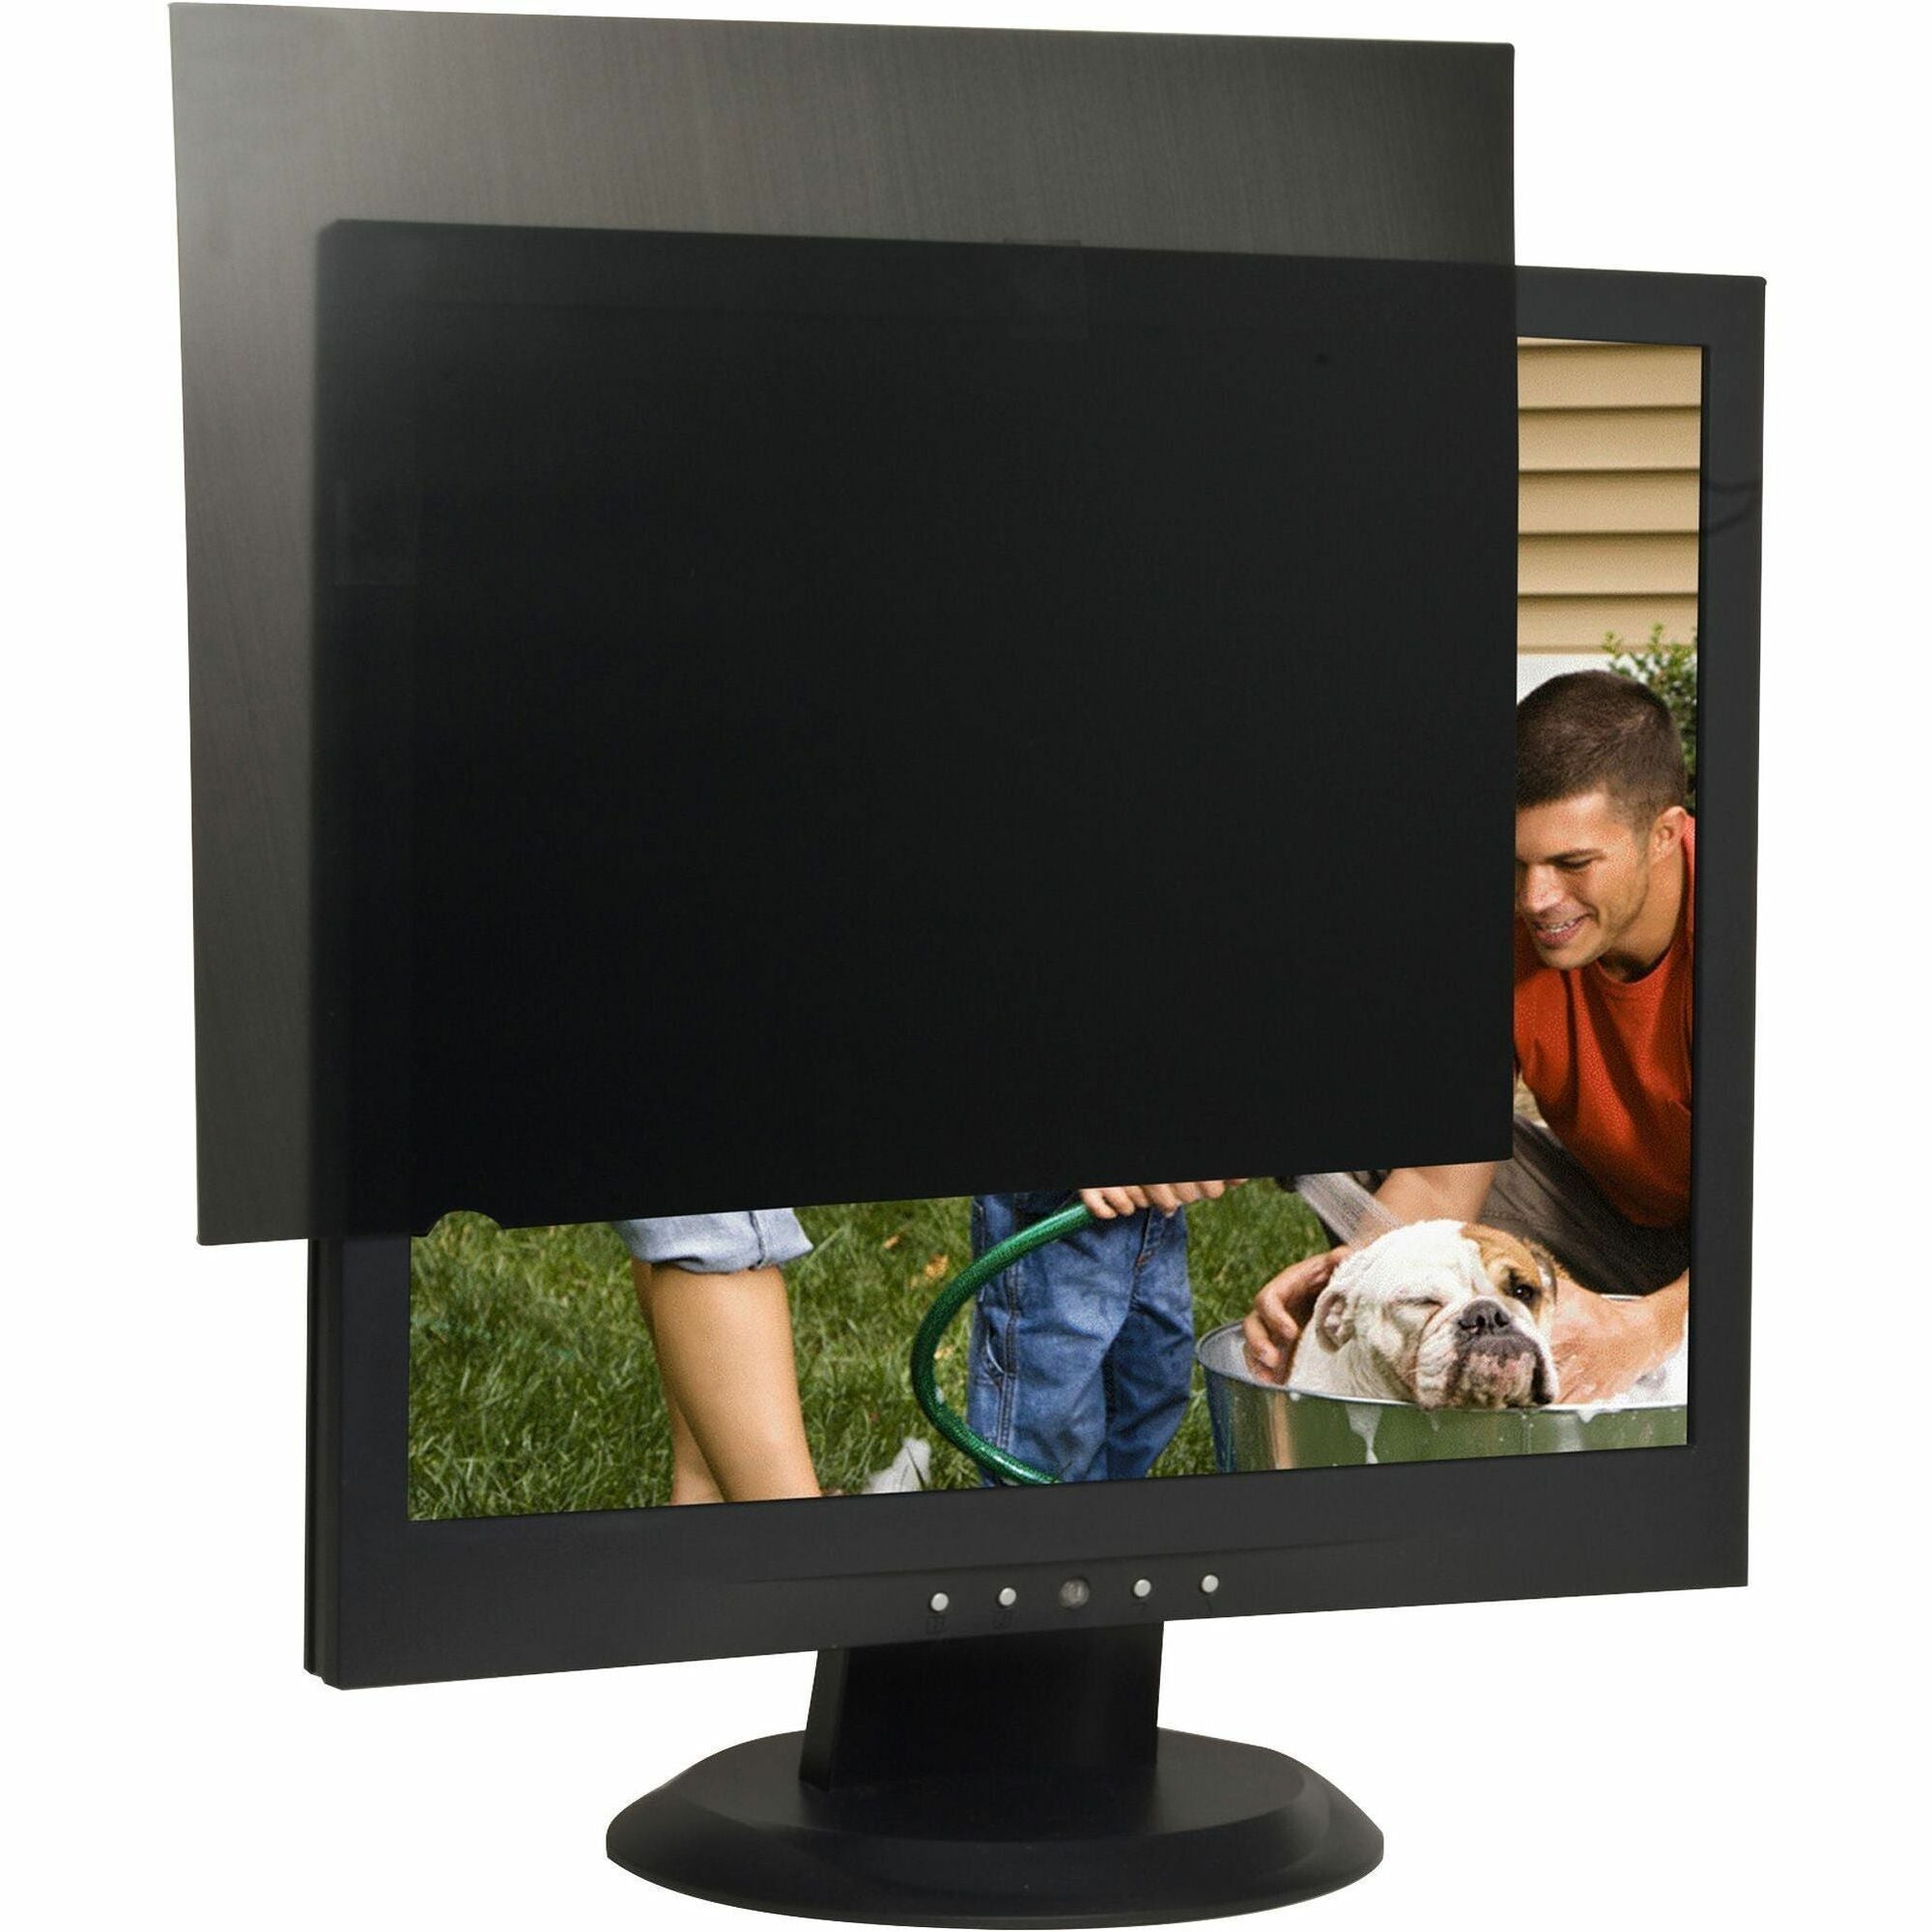 business-source-19-monitor-blackout-privacy-filter-black-for-19lcd-monitor-54-damage-resistant-anti-glare-1-pack_bsn20667 - 1